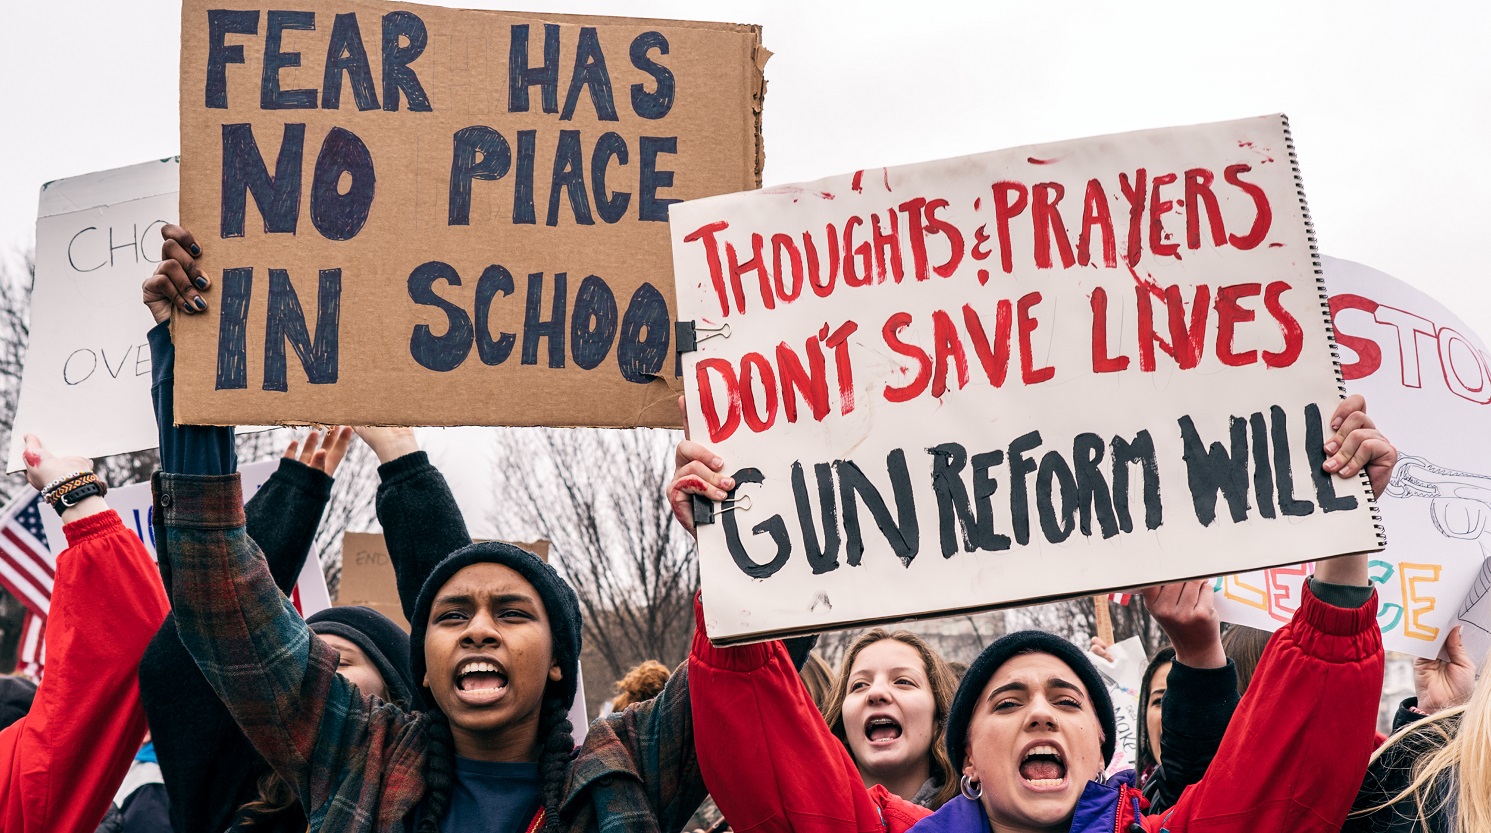 As Moral Relativism Replaces Christian Values, Americans Will Suffer More Mass Shootings